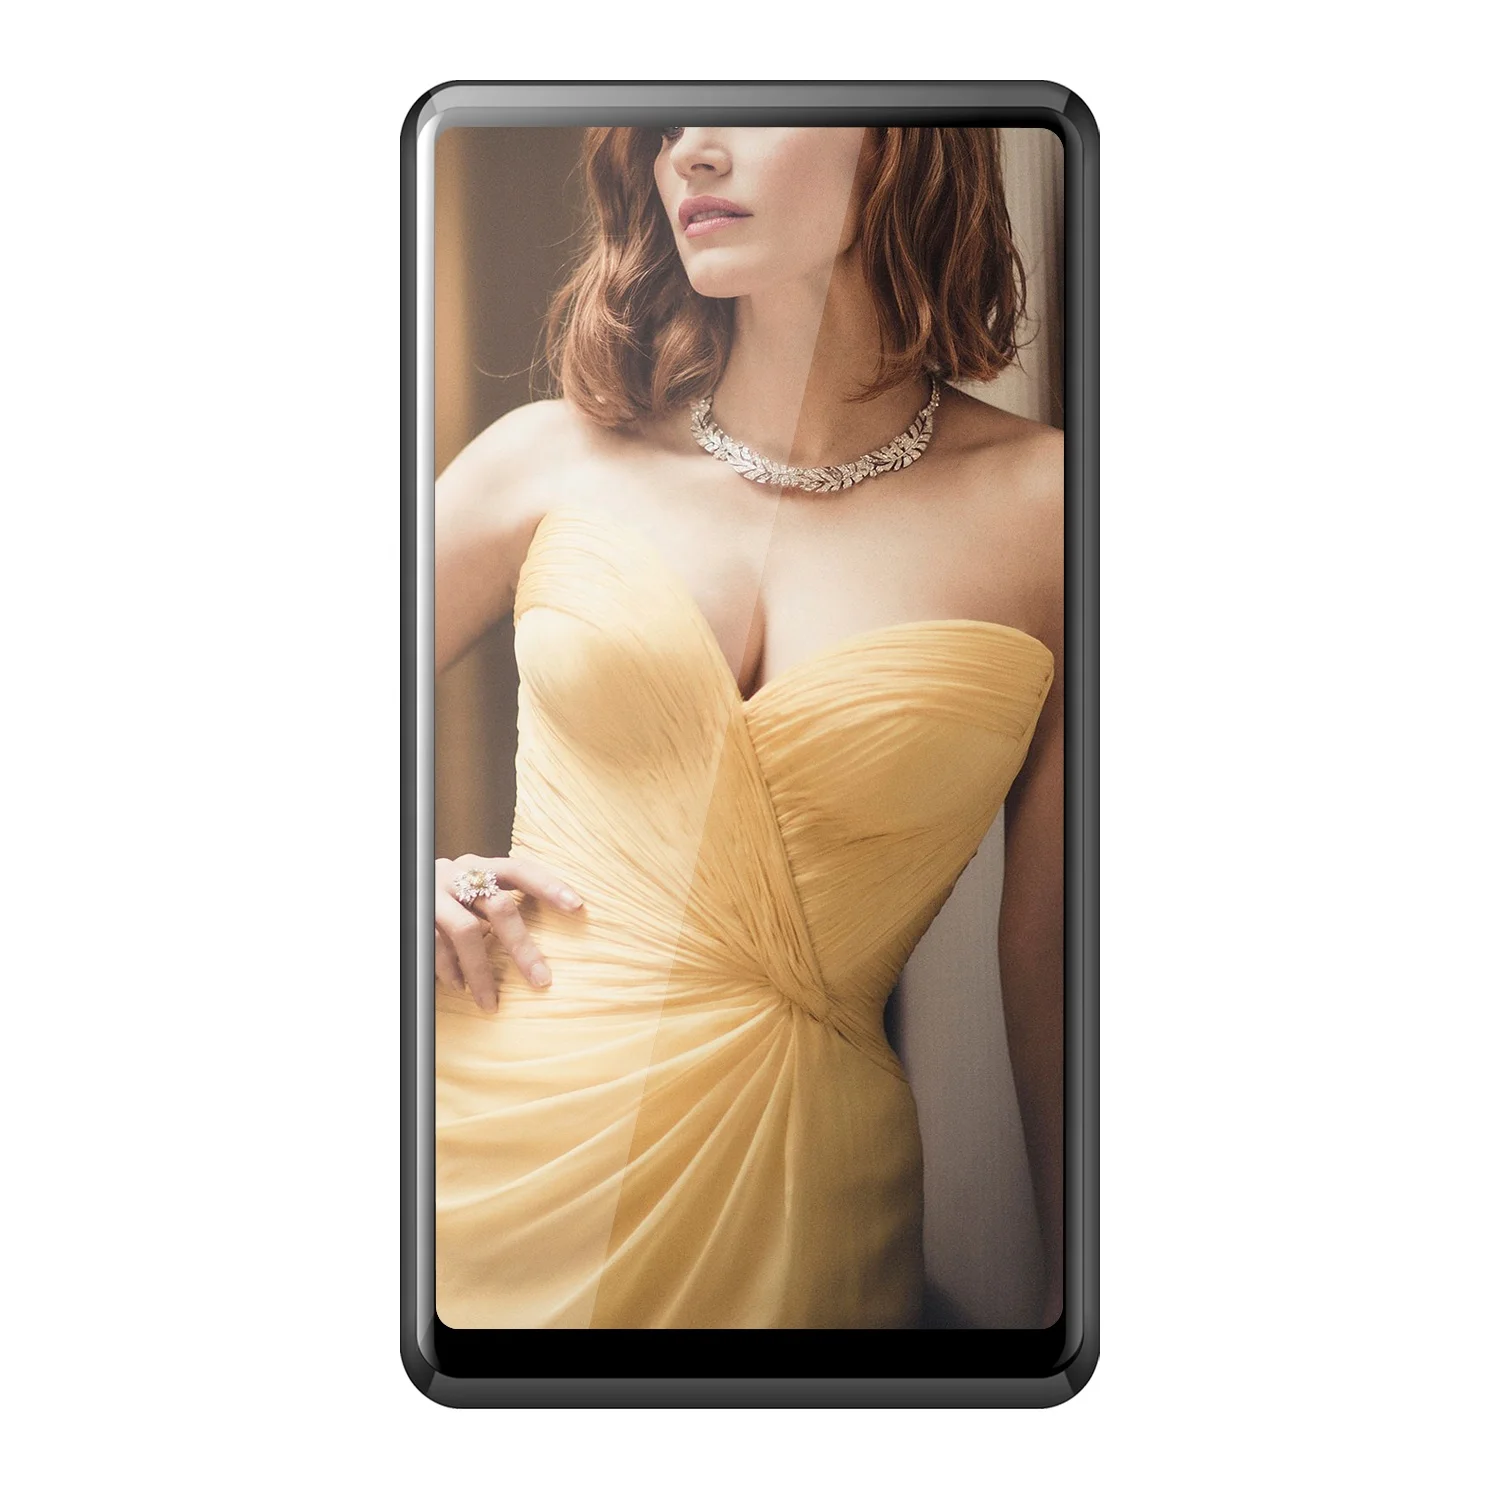 

S8 Bt Touch screen 4 inches BT WIFI Android home office recreation new movie free download sexy videos mp3 mp4 player